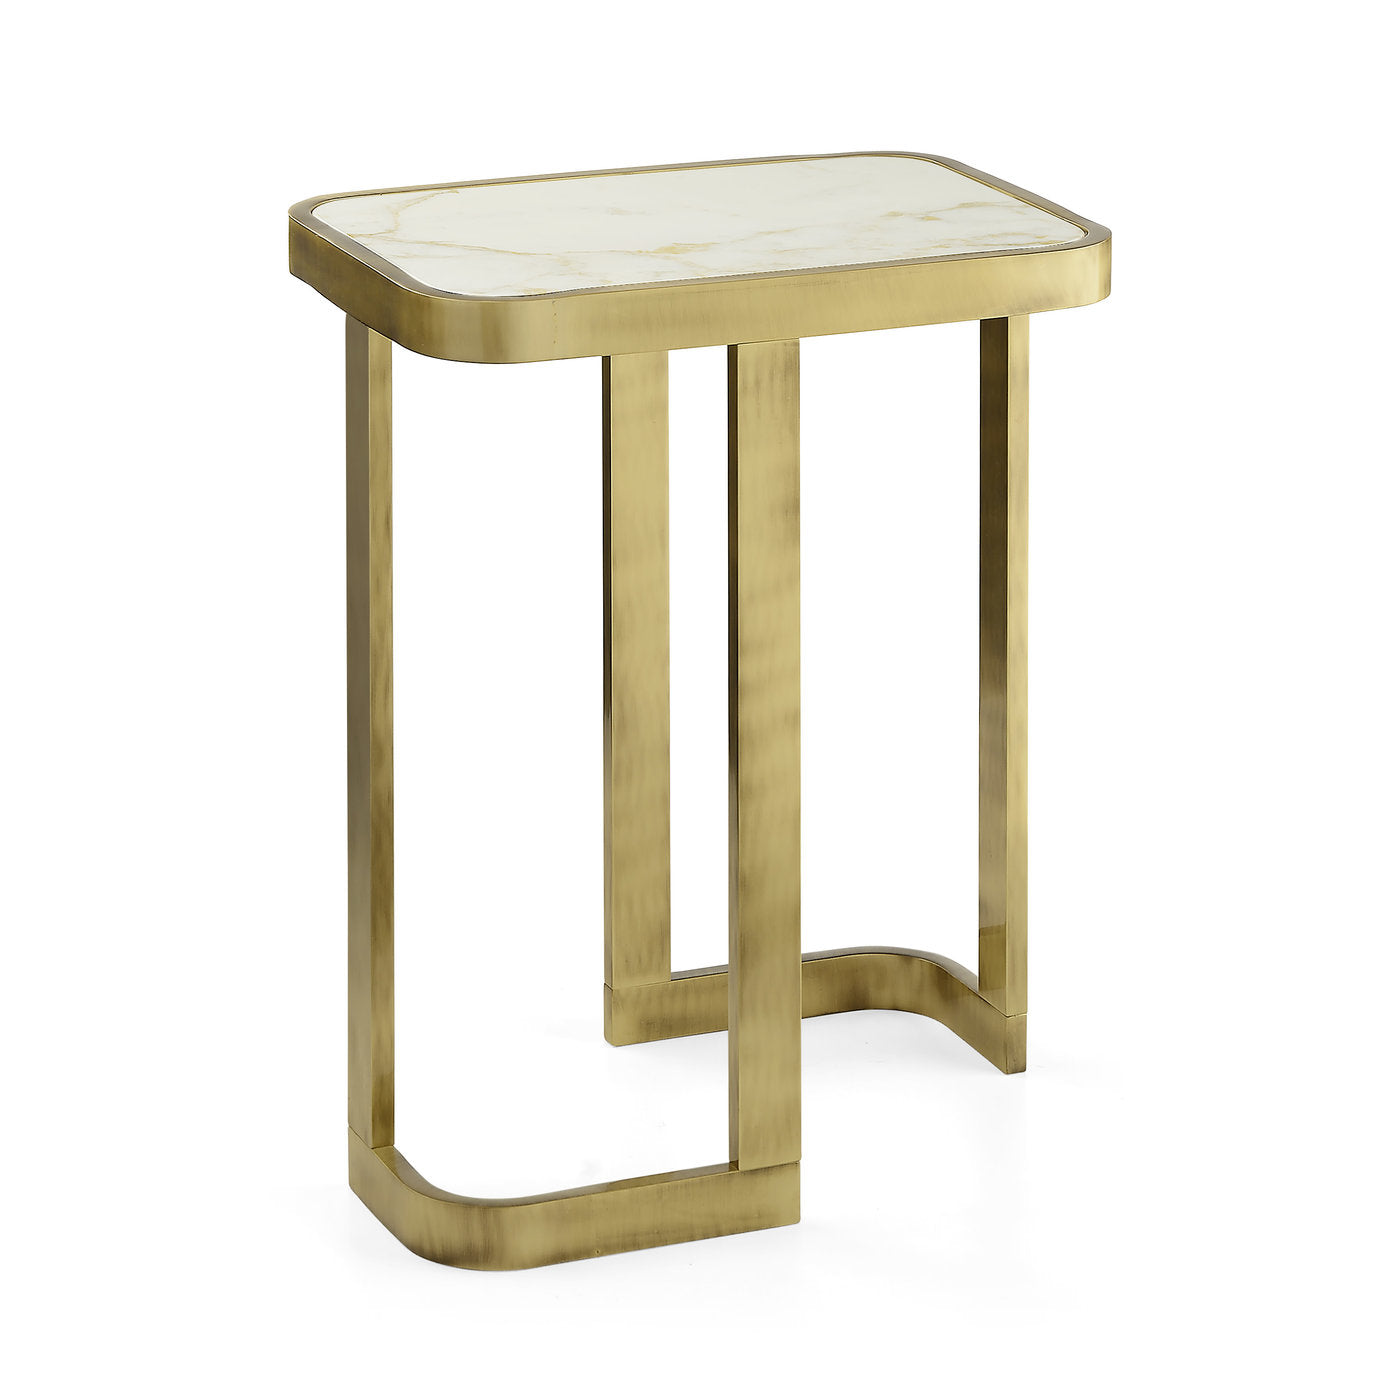 Jean Marble Side Table - Alternative view 1